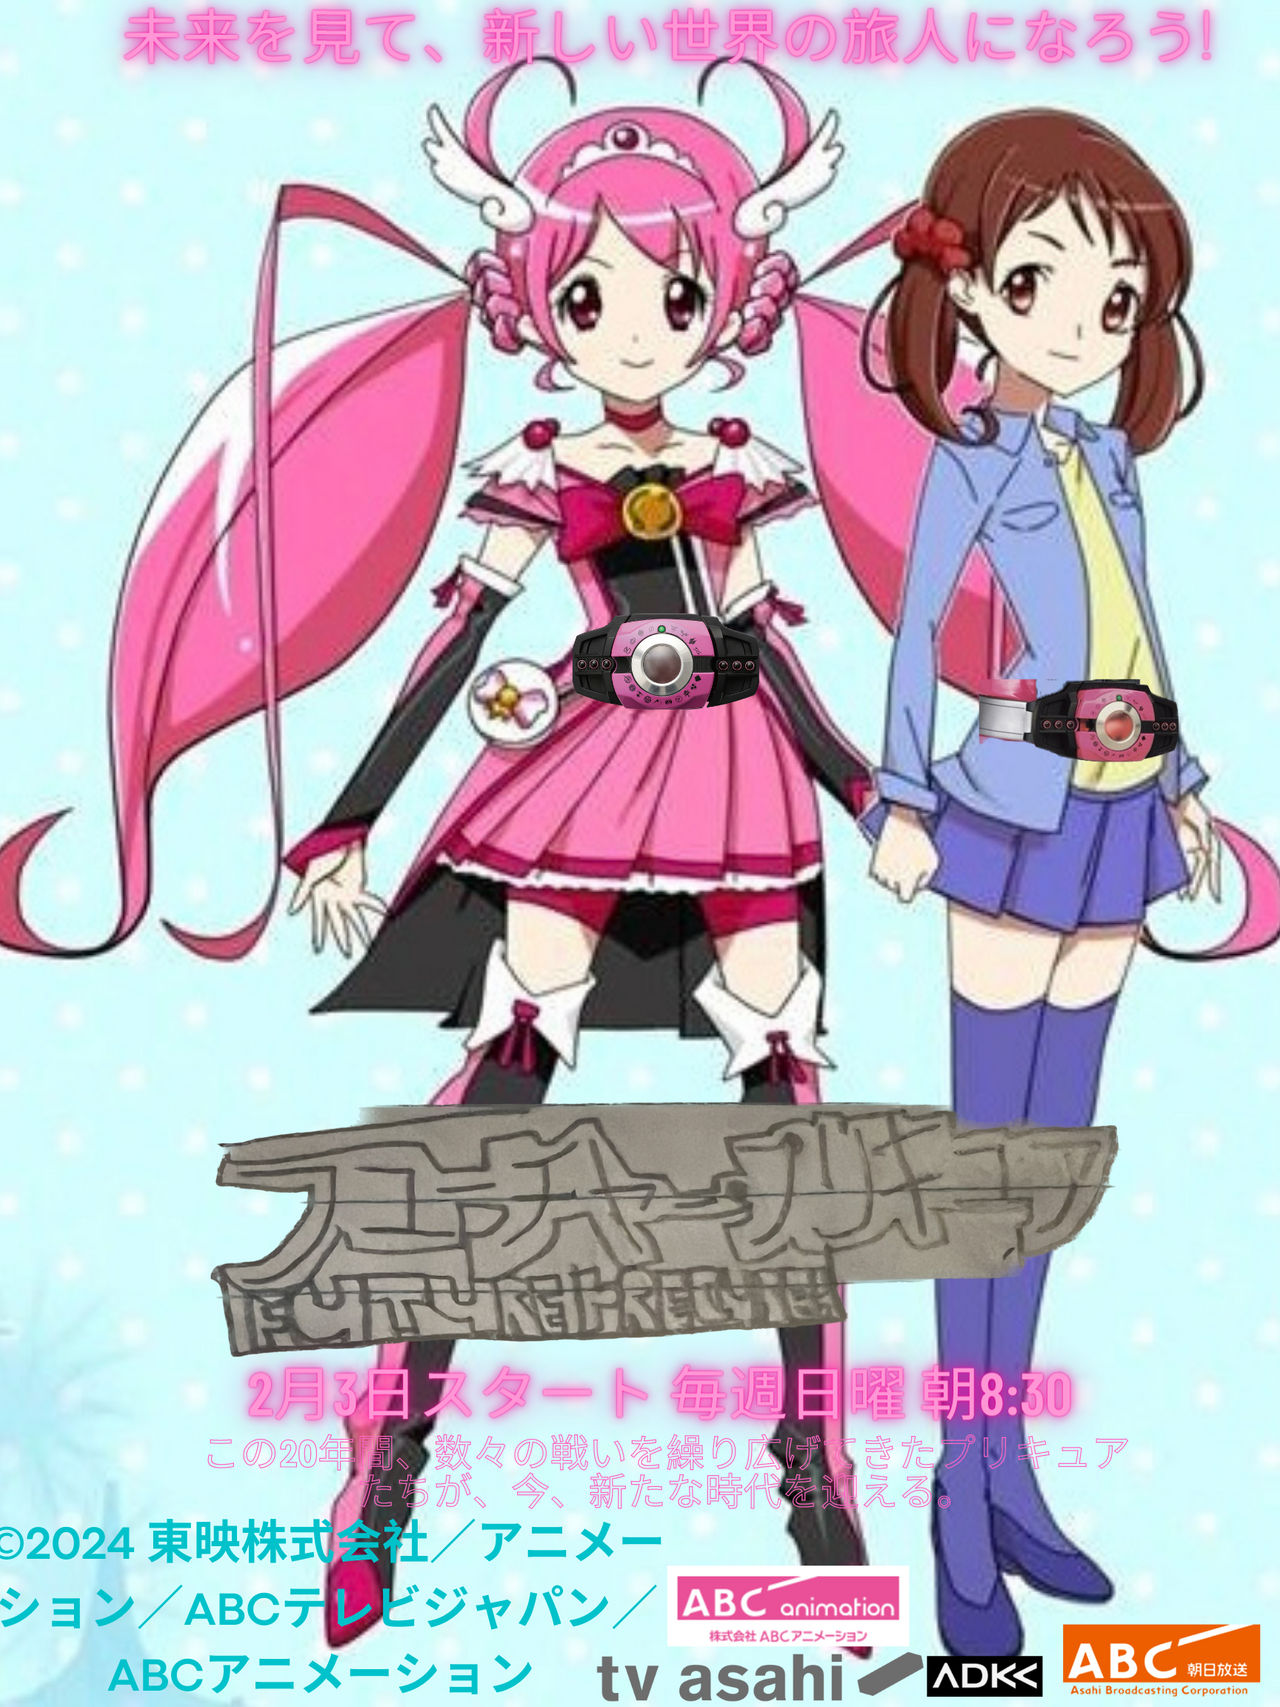 Future Pretty Cure! poster 2 by WipeoutNeo on DeviantArt